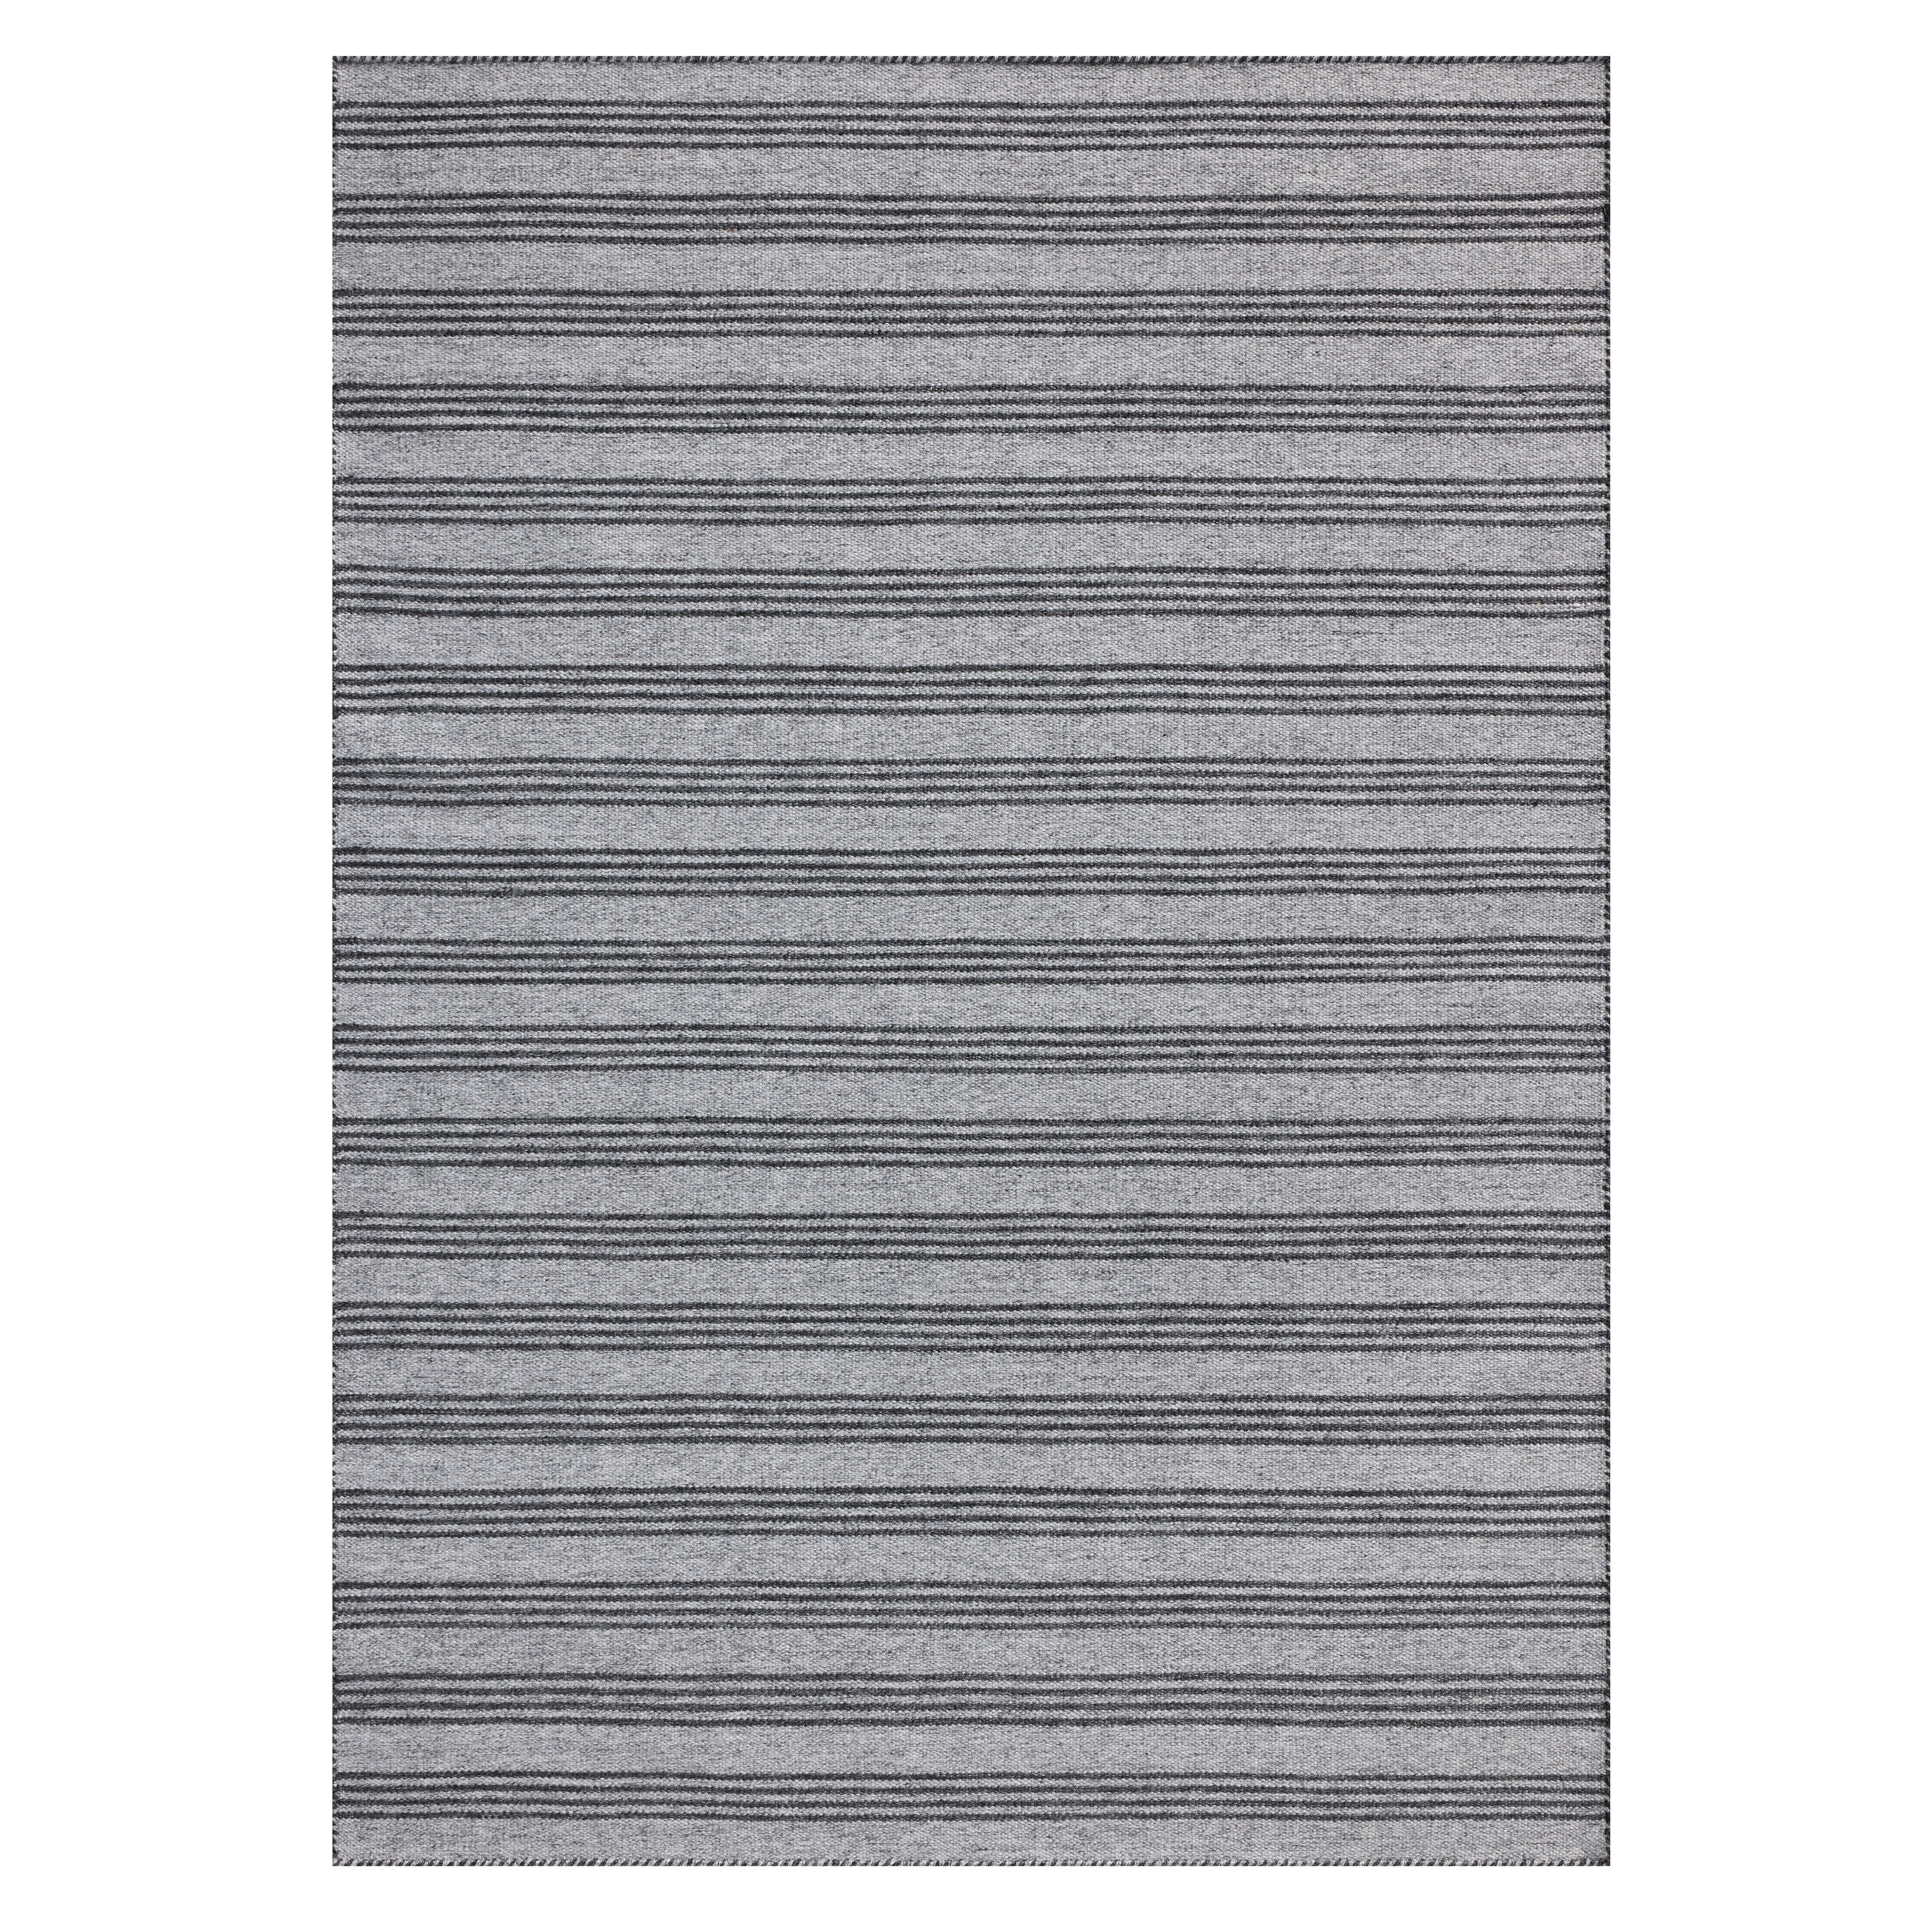 Charlie Dove Charcoal Rug Items range from $89.00 to $1159.00